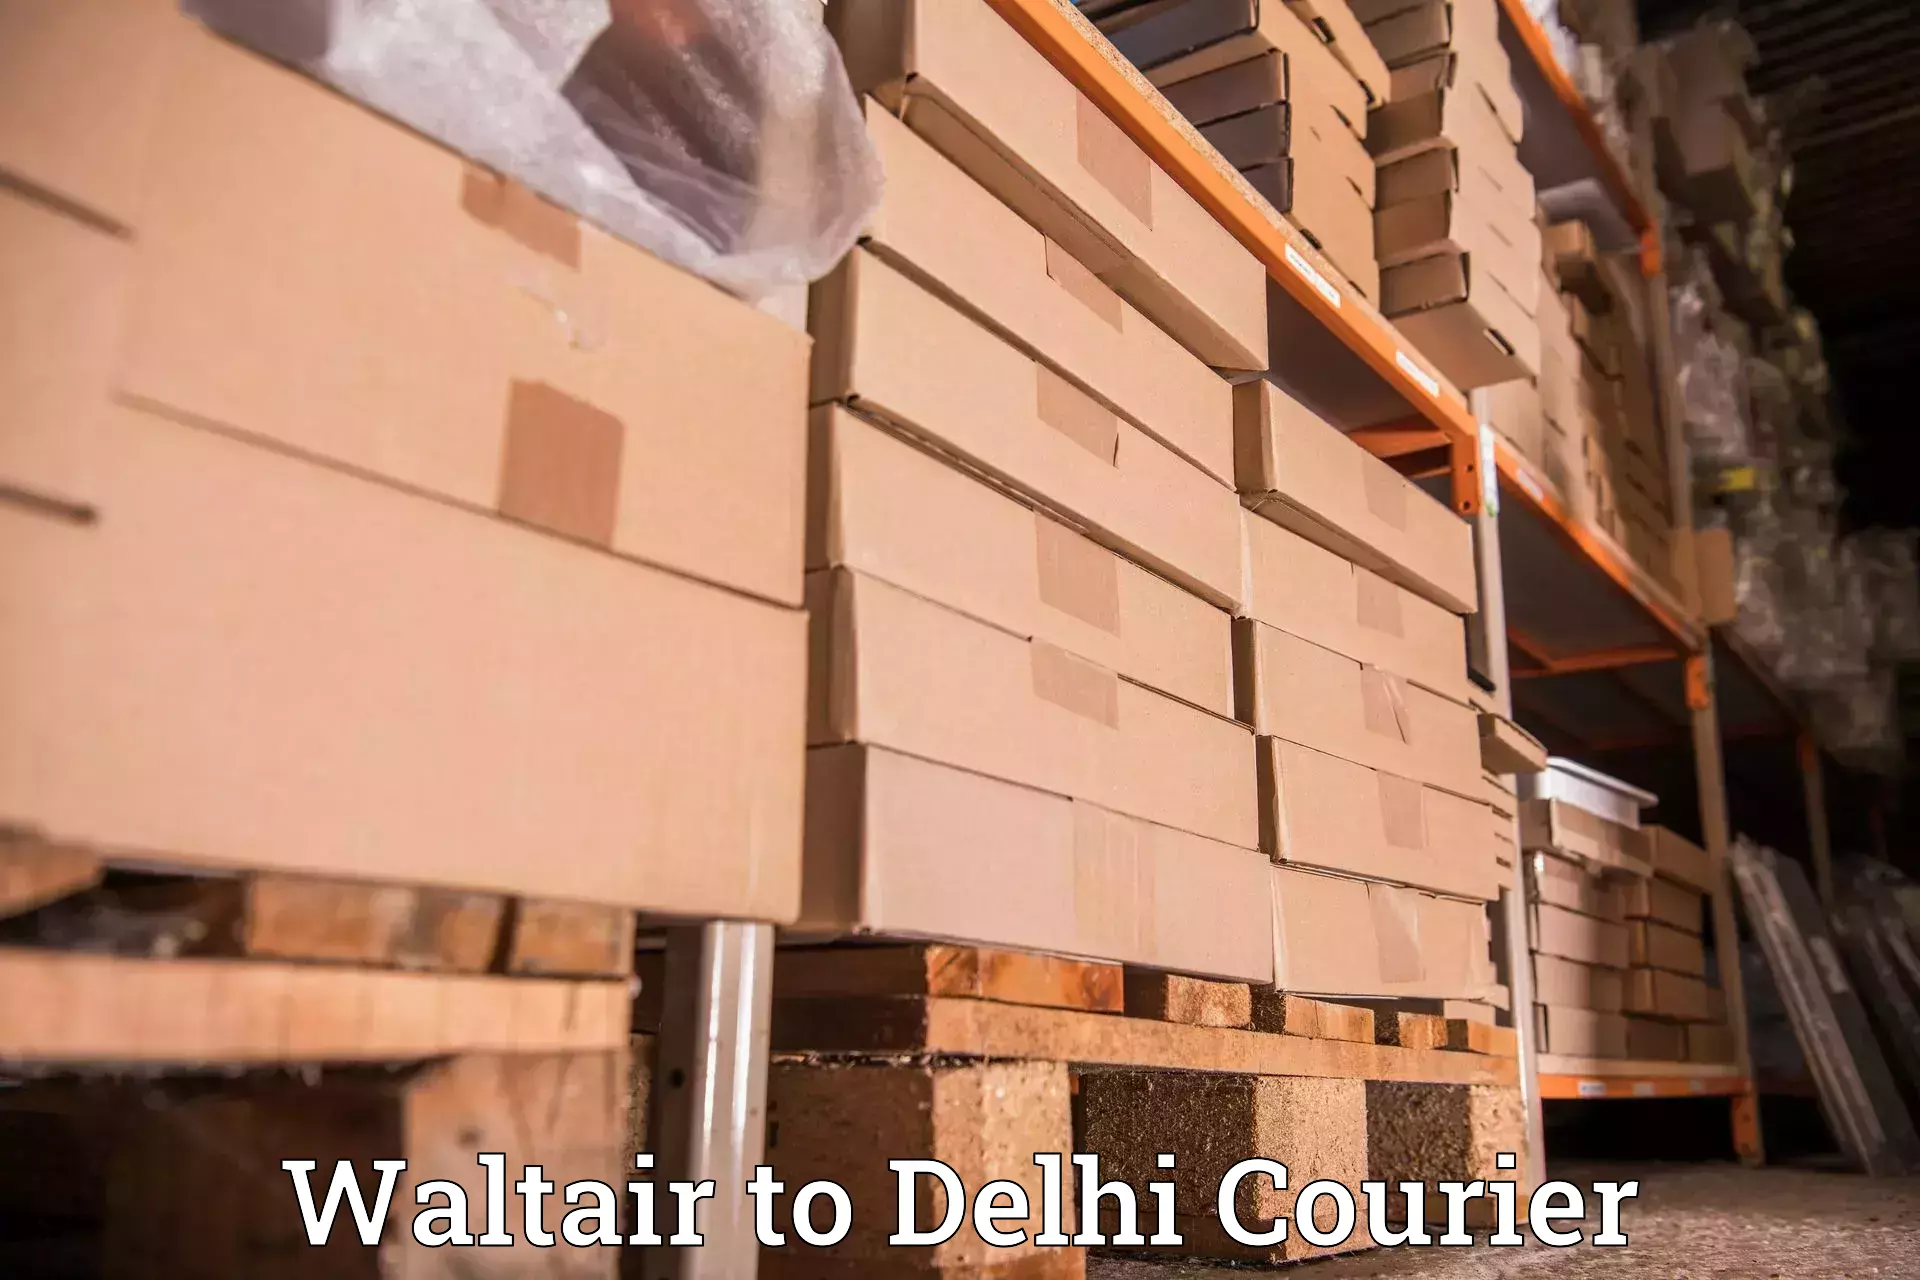 Next-day delivery options Waltair to NIT Delhi